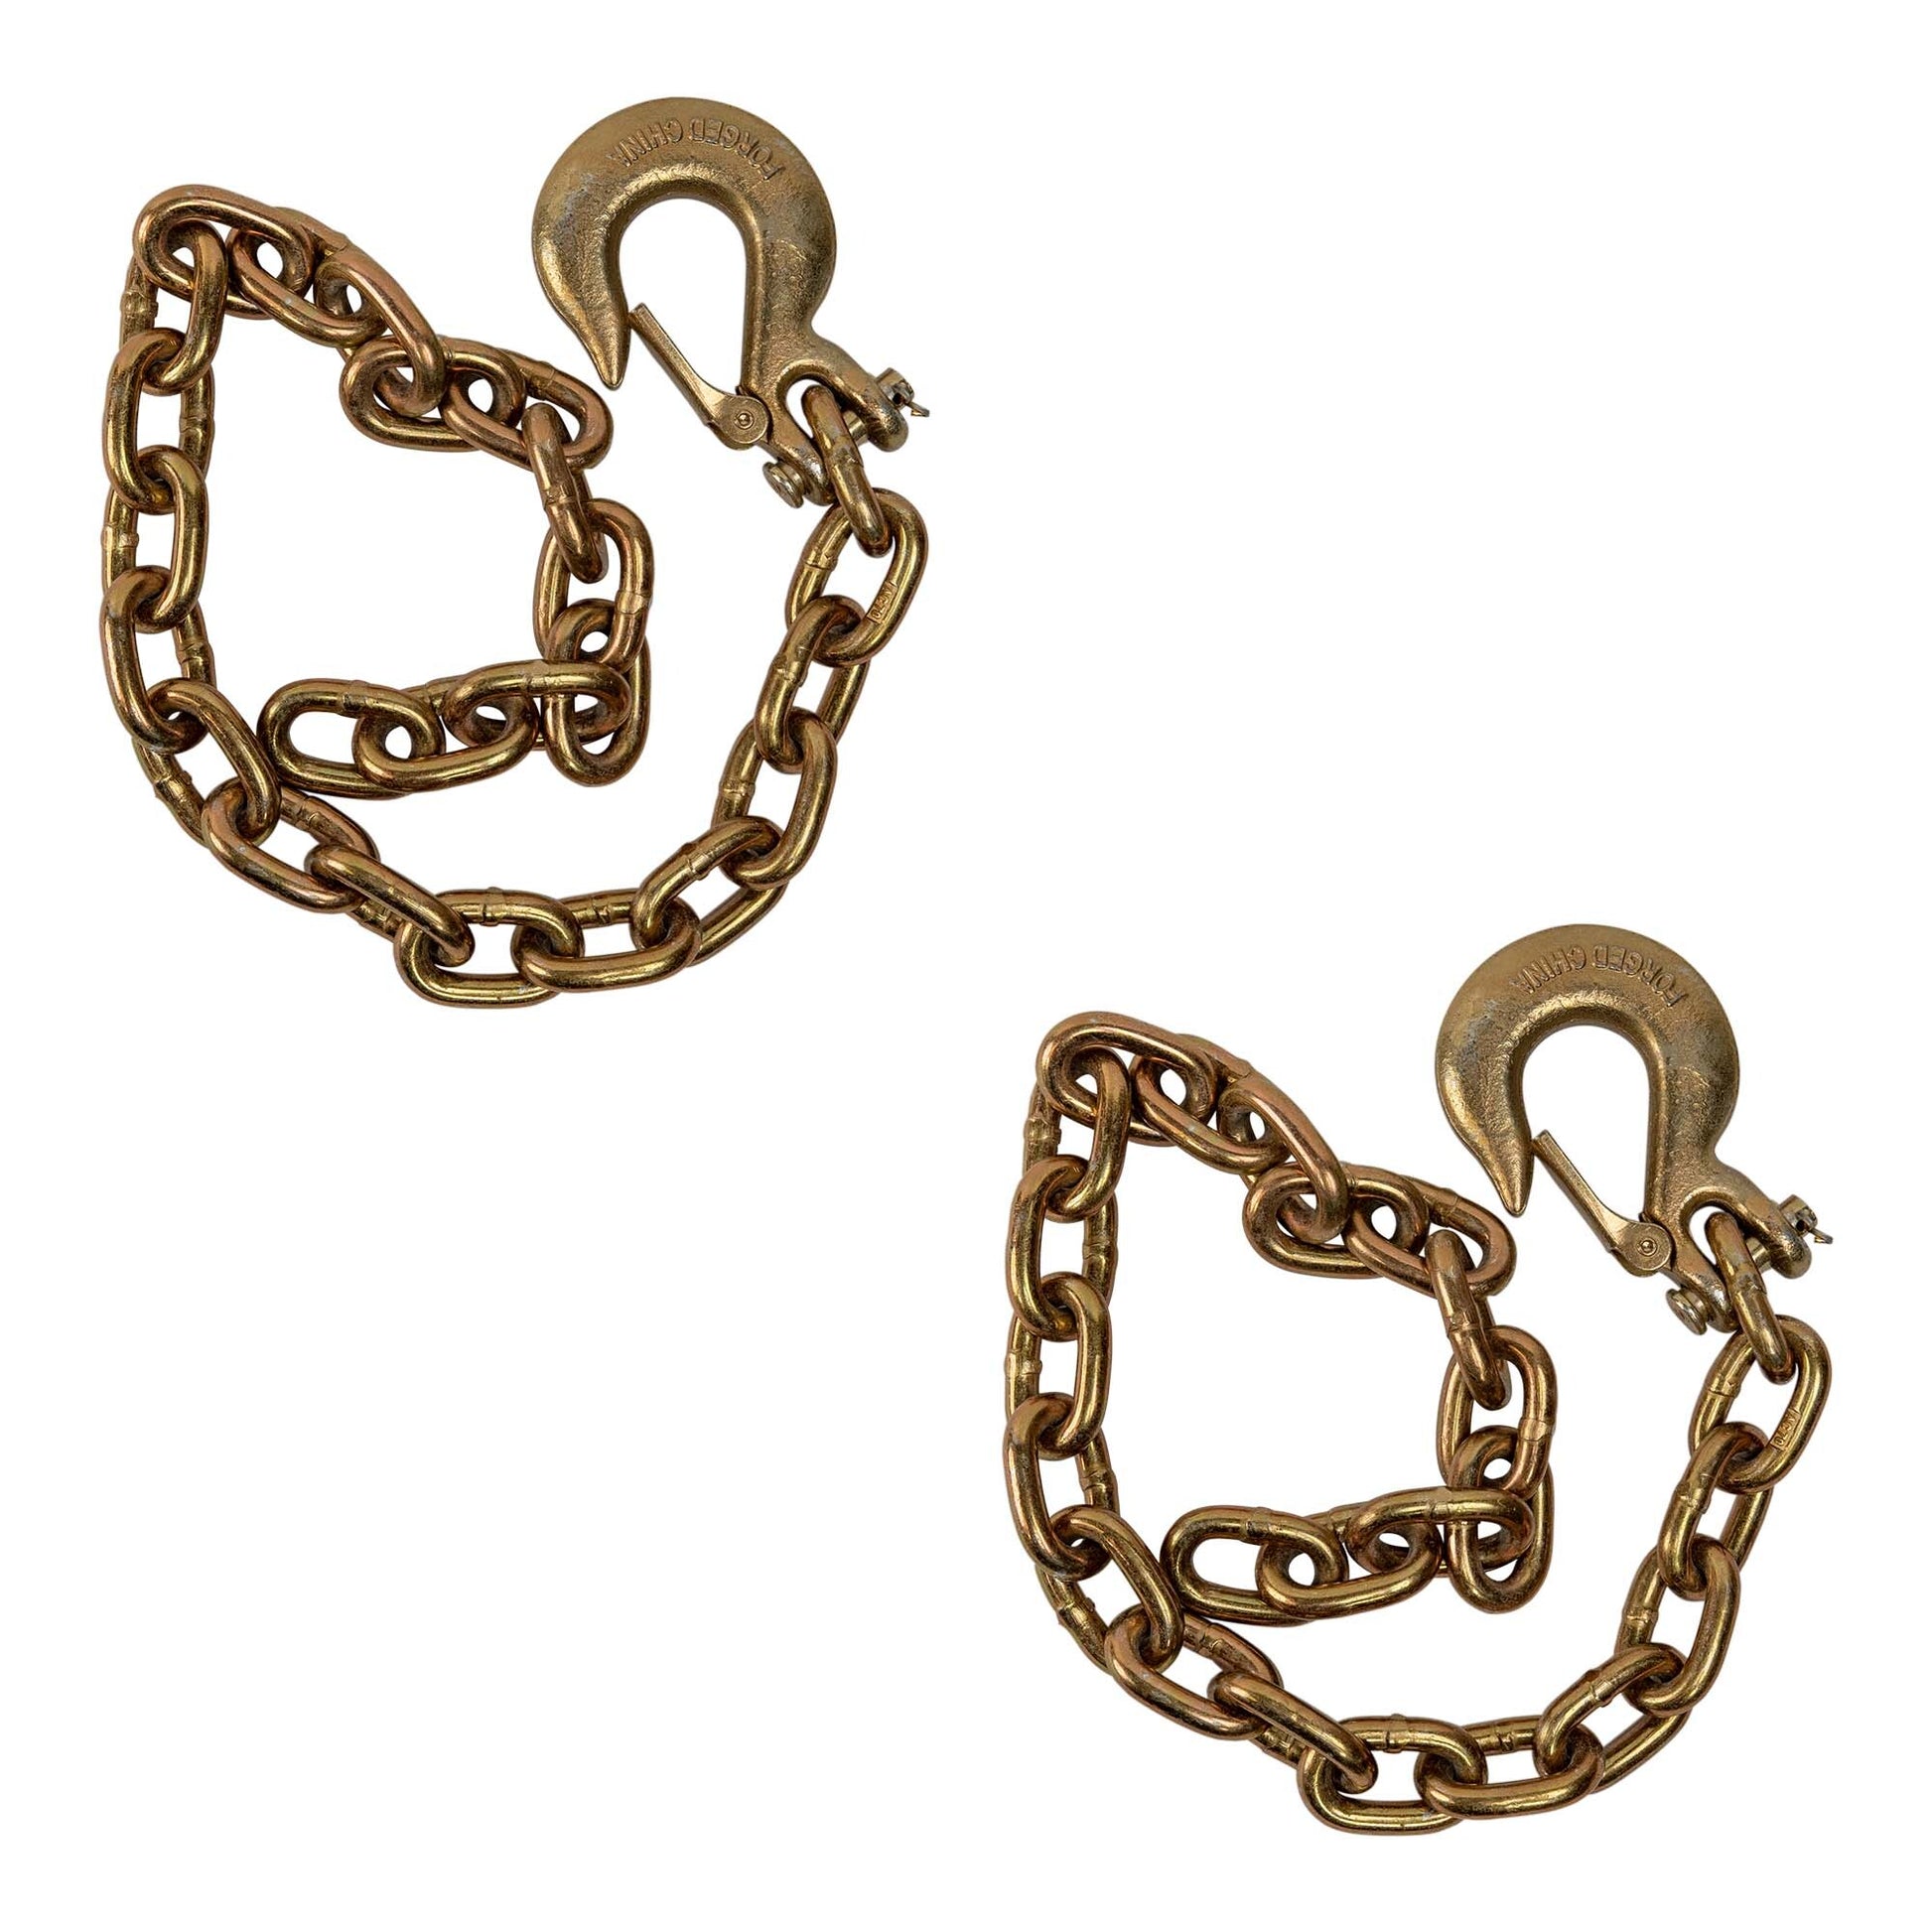 Gold Trailer Safety Chain - 3/8 x 39" with 1 Clevis Hook (27.4k Capacity) - The Trailer Parts Outlet